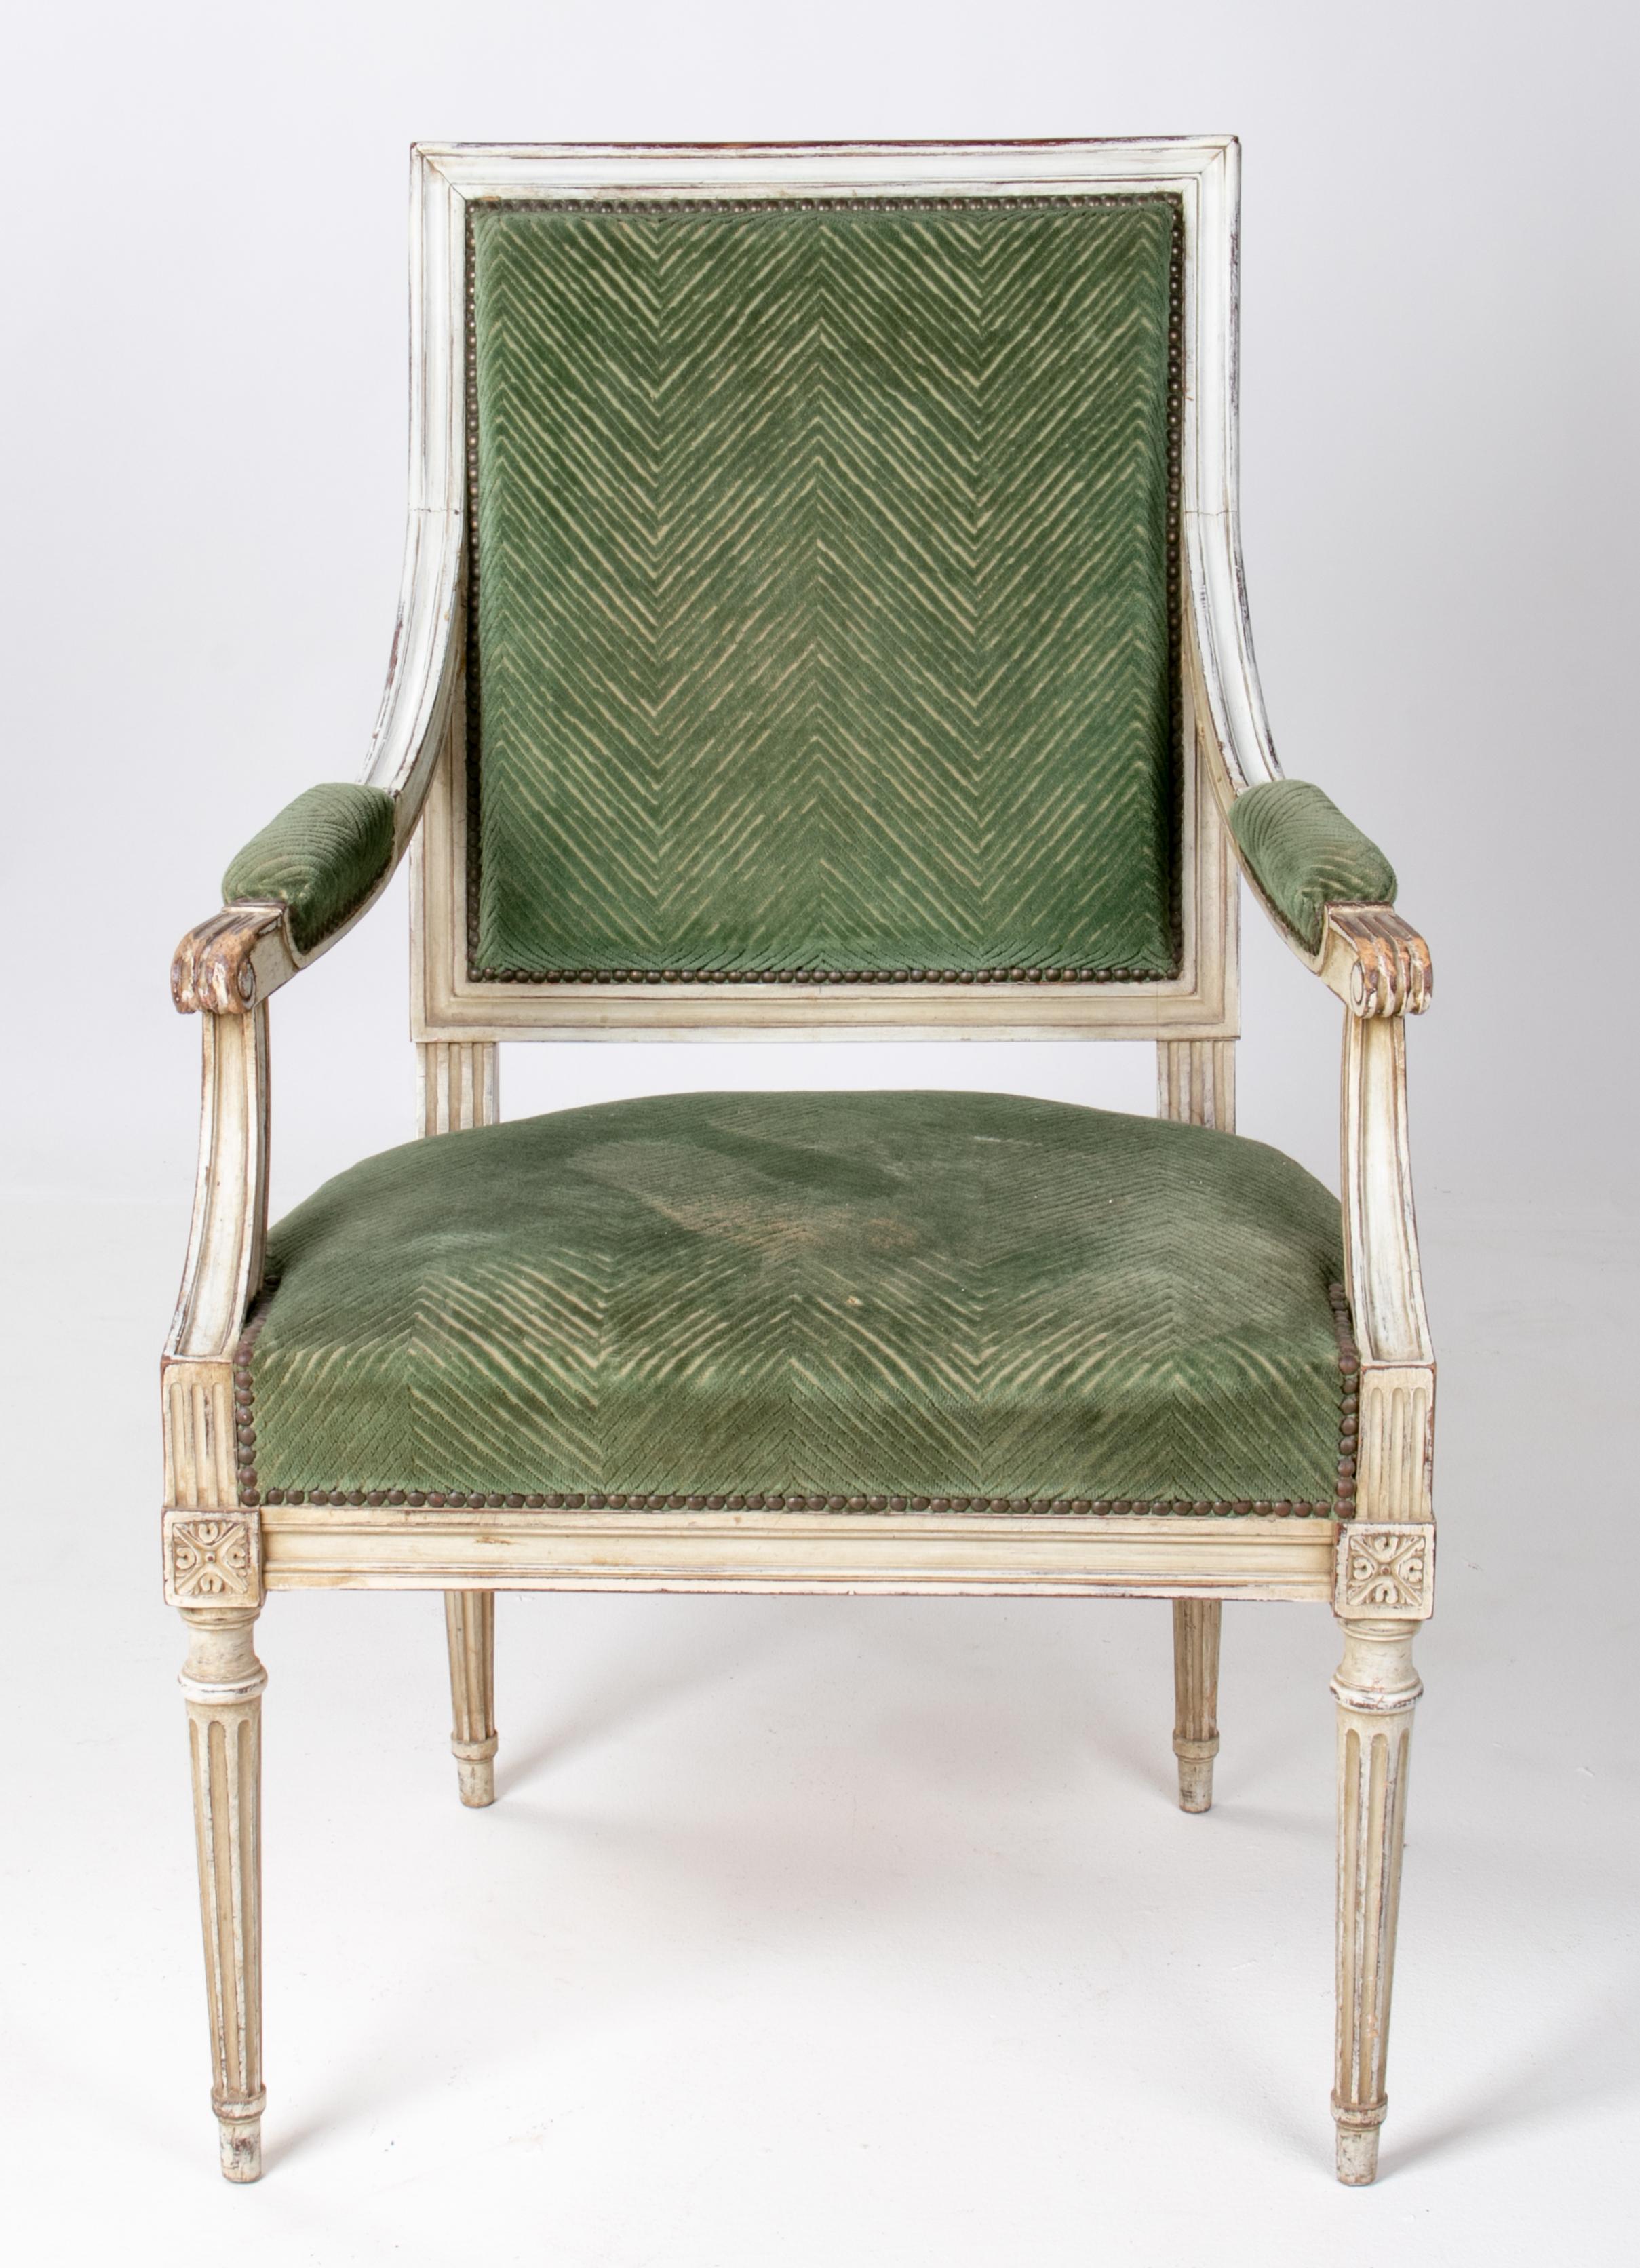 1870s French Louis XVI style white lacquered and velvet upholstered armchair.
            